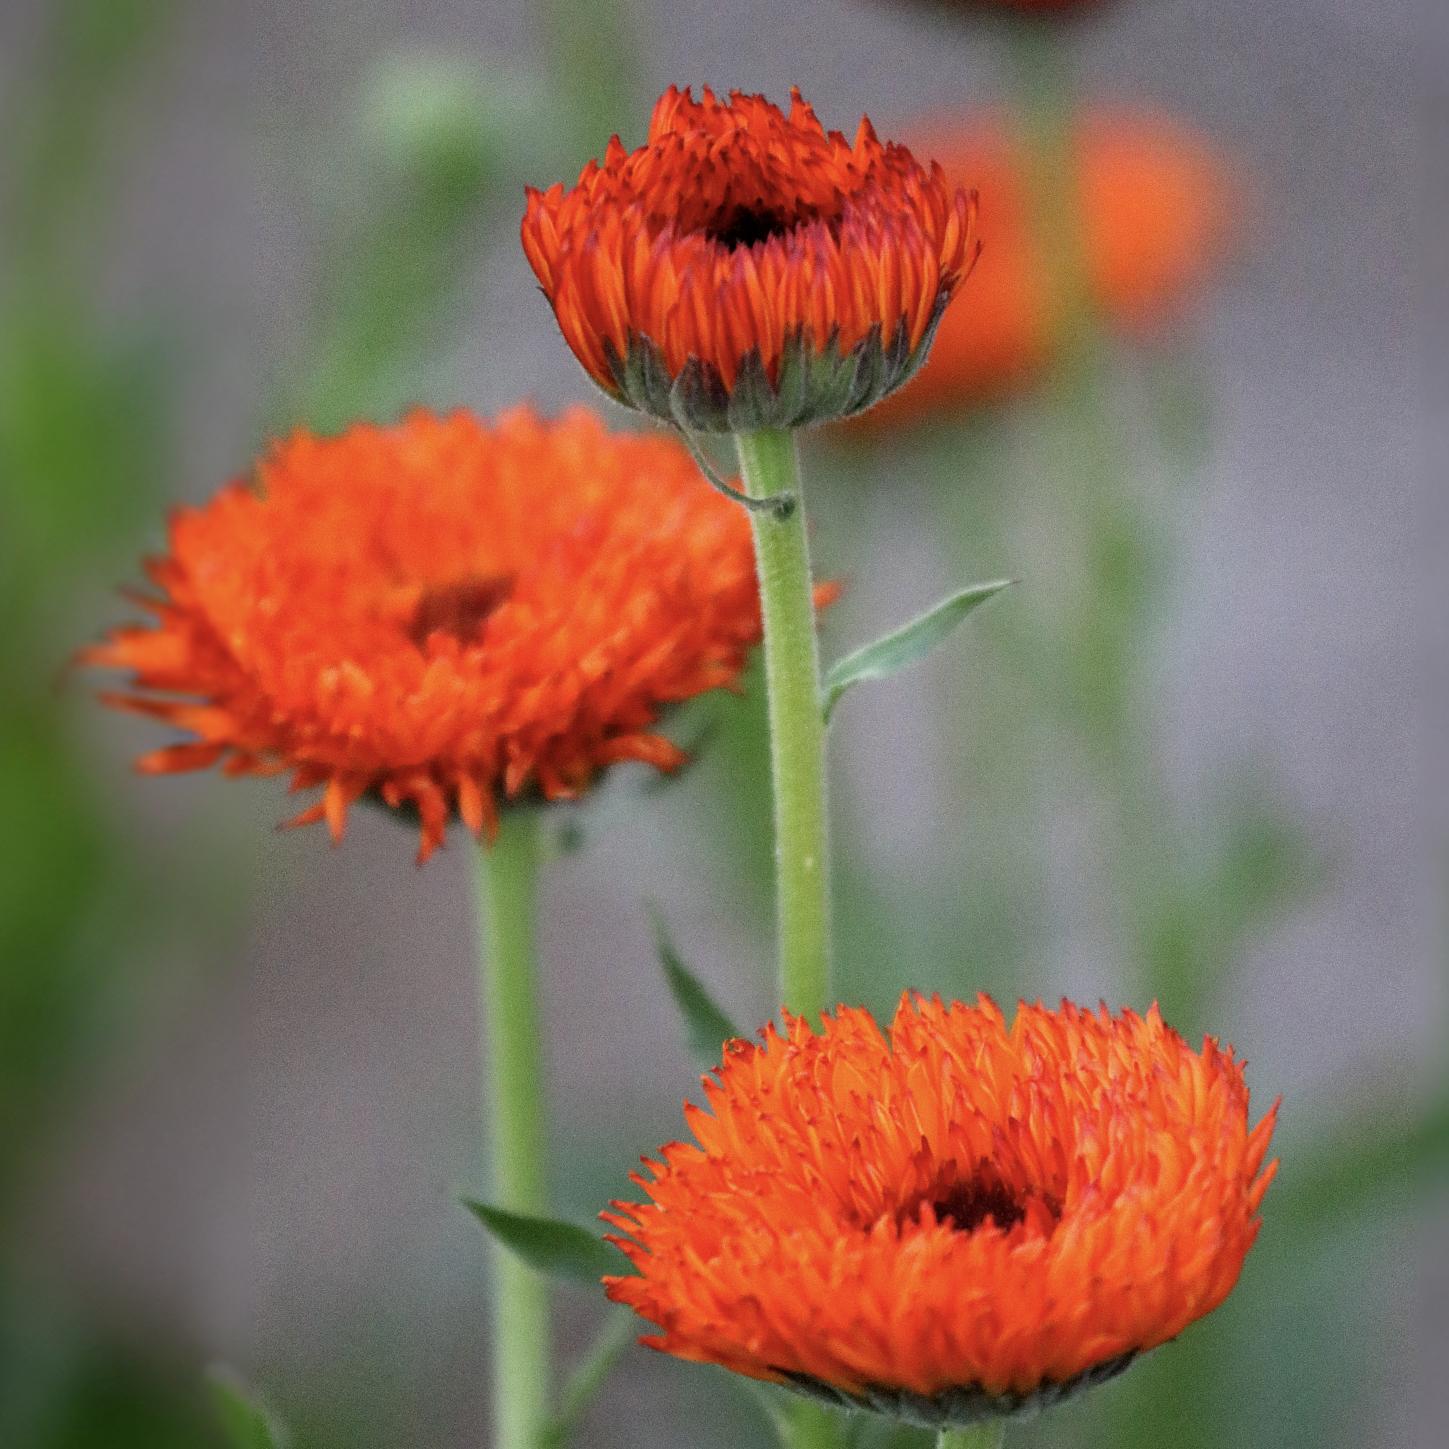 Several disk-shaped bright-orange flowers, with many tiny petals growing on tall green stems